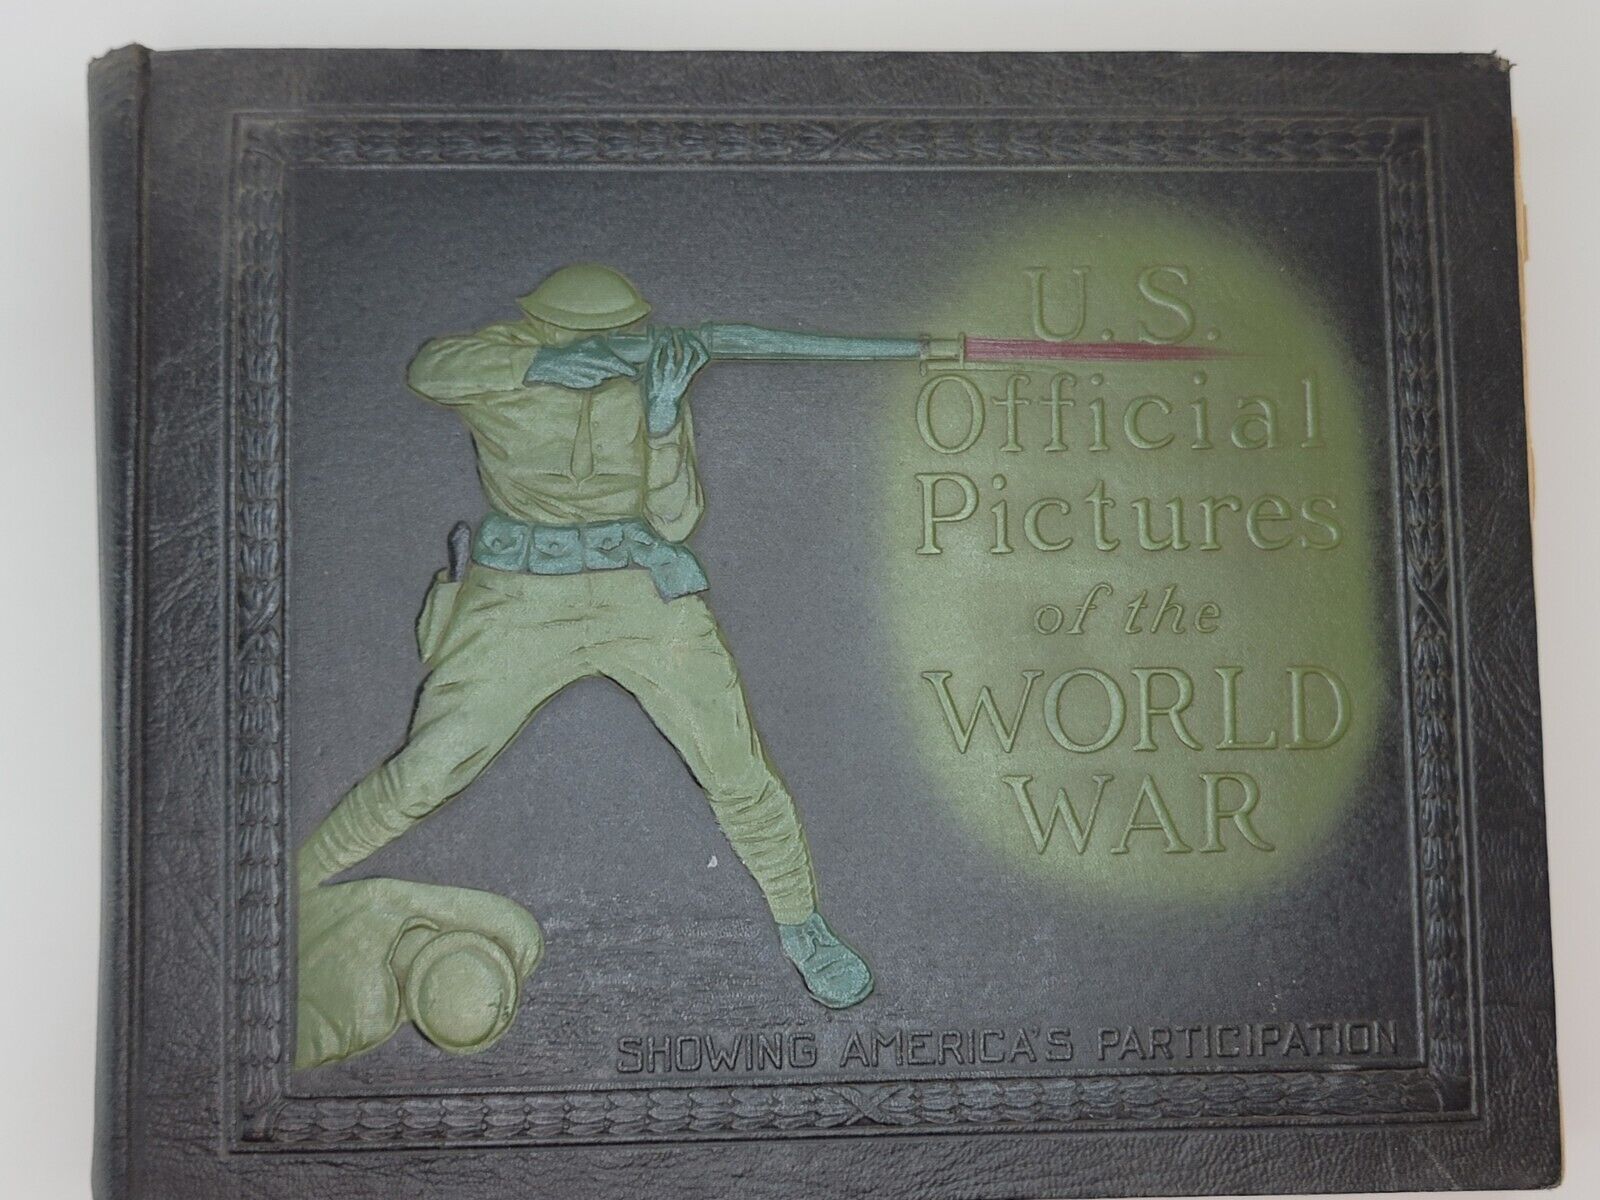 1928 US Official Pictures of the World War WW1 Army Navy Marines USA HC